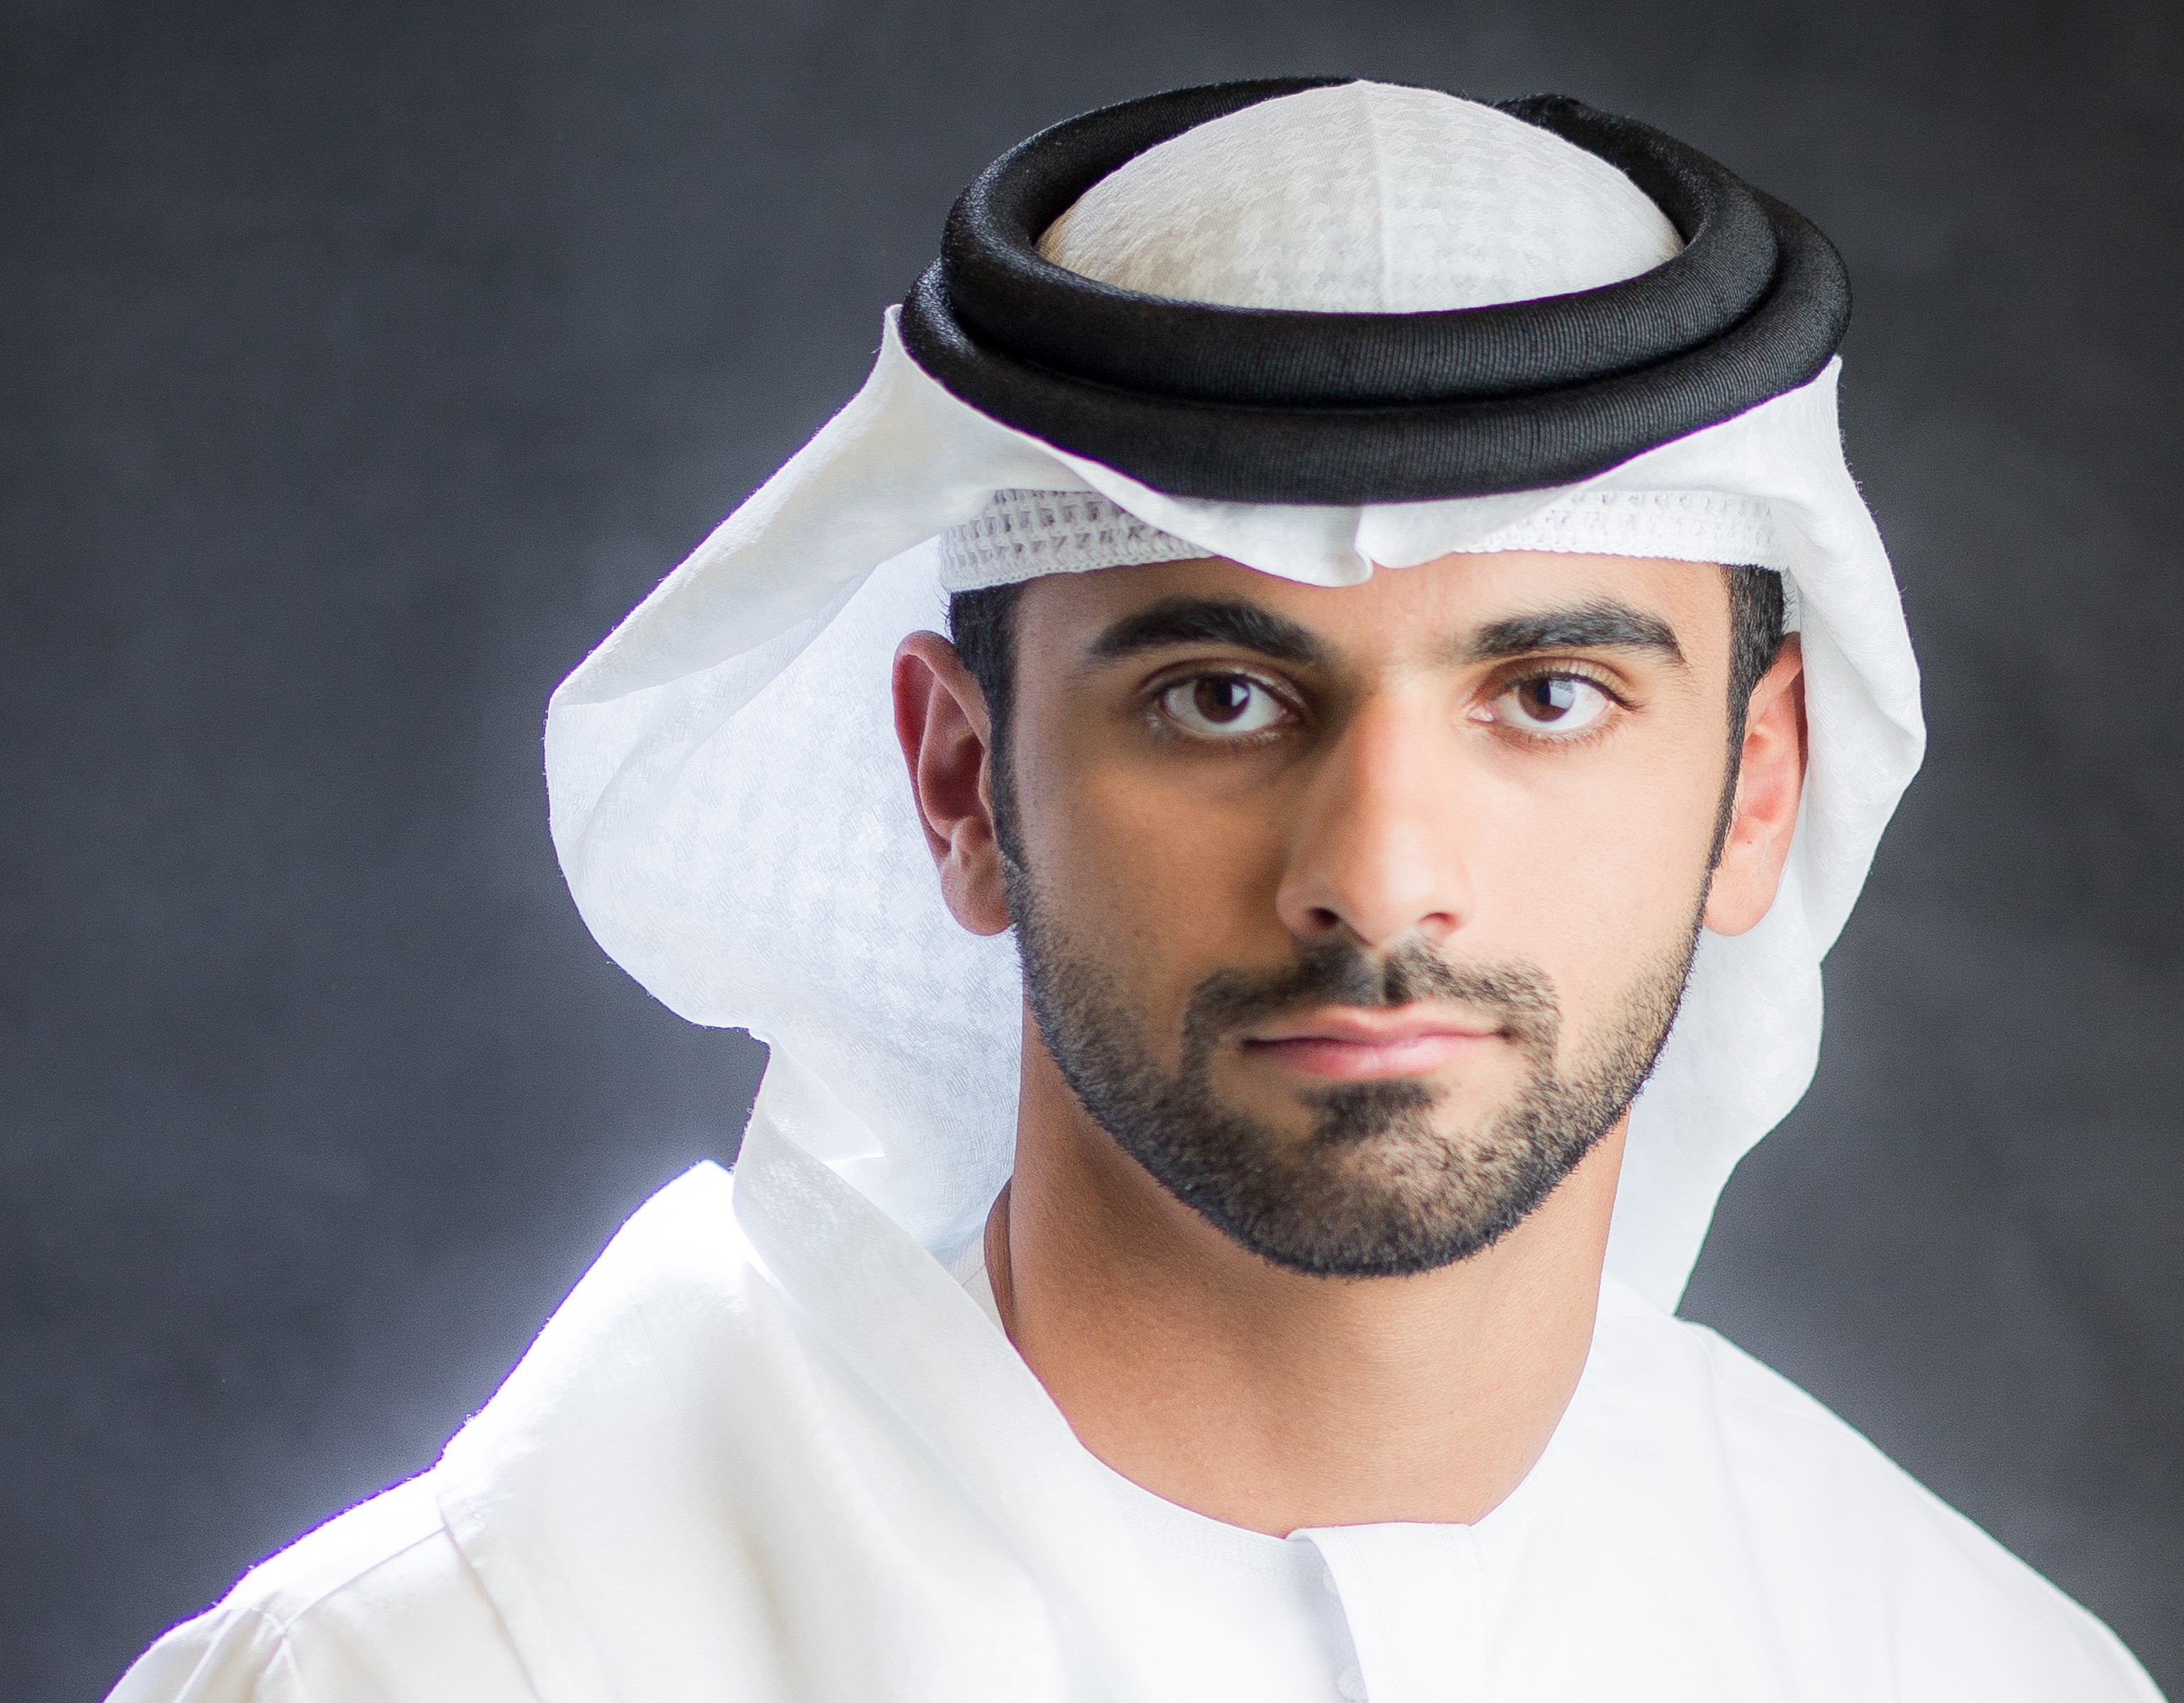 Mansour bin Mohammed welcomes the participants in the 22nd edition of the Dubai World Marathon